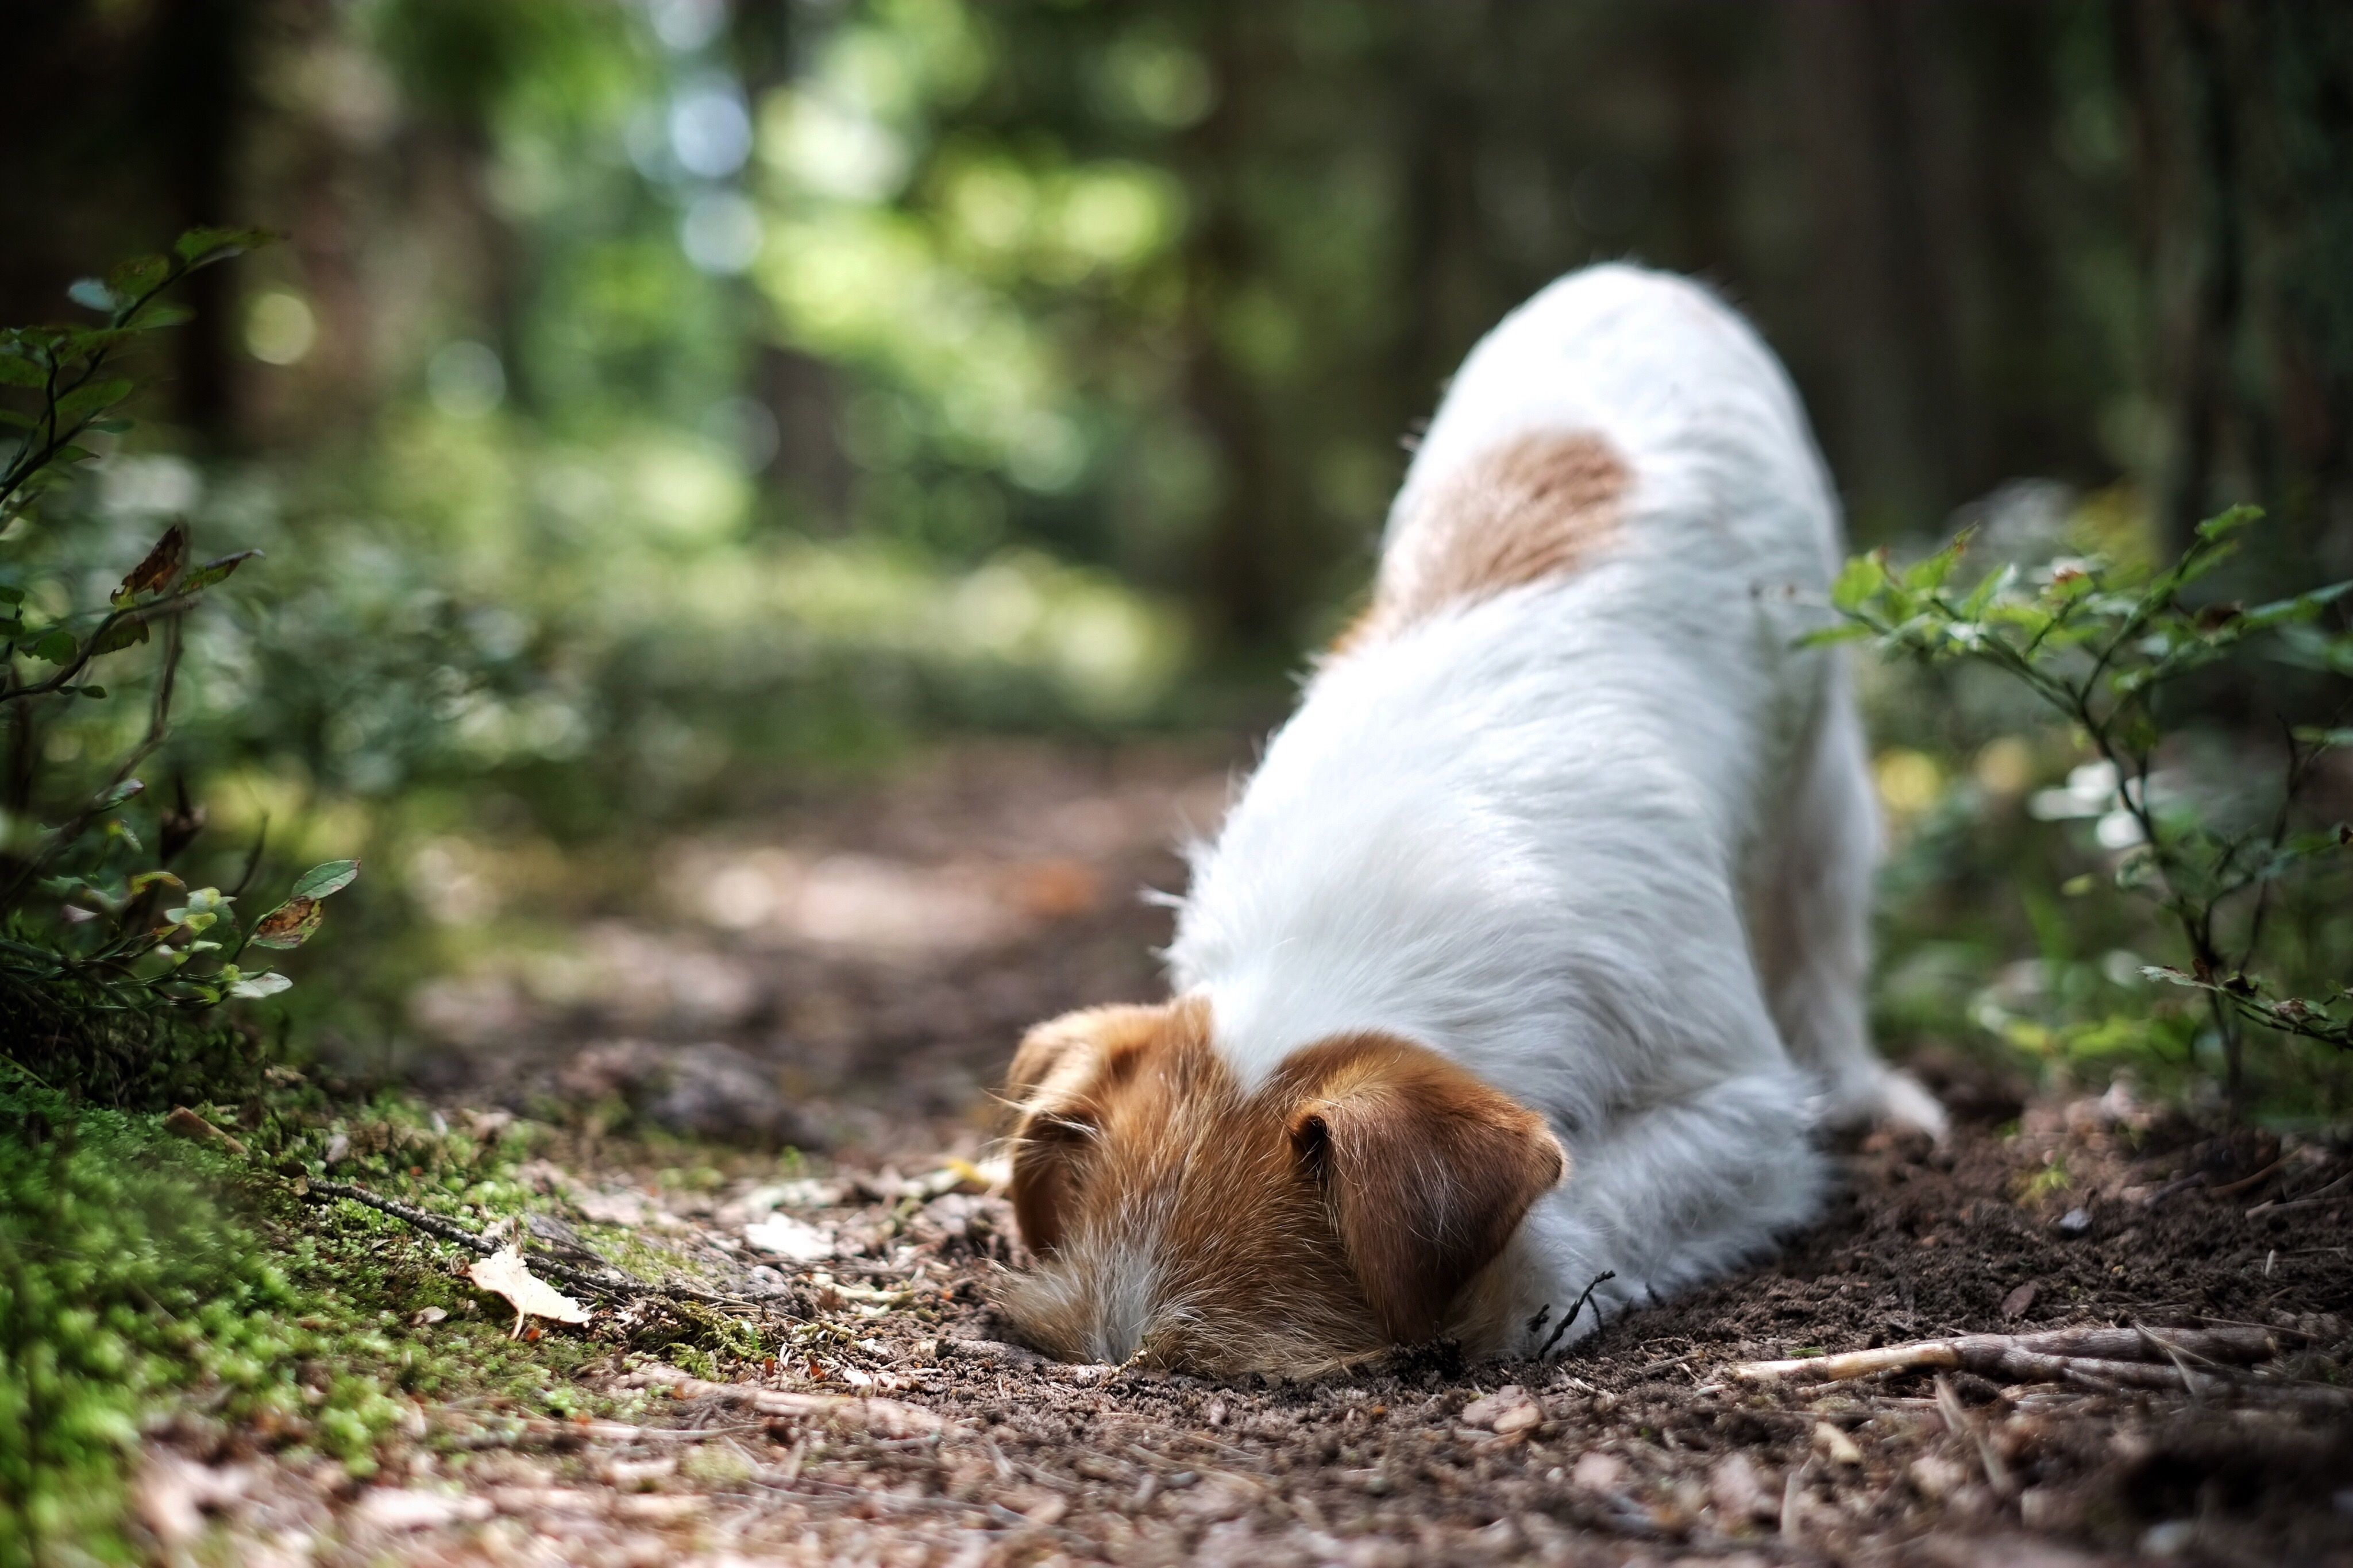 Close-Up Of A Dog While Burrowing In A Forest